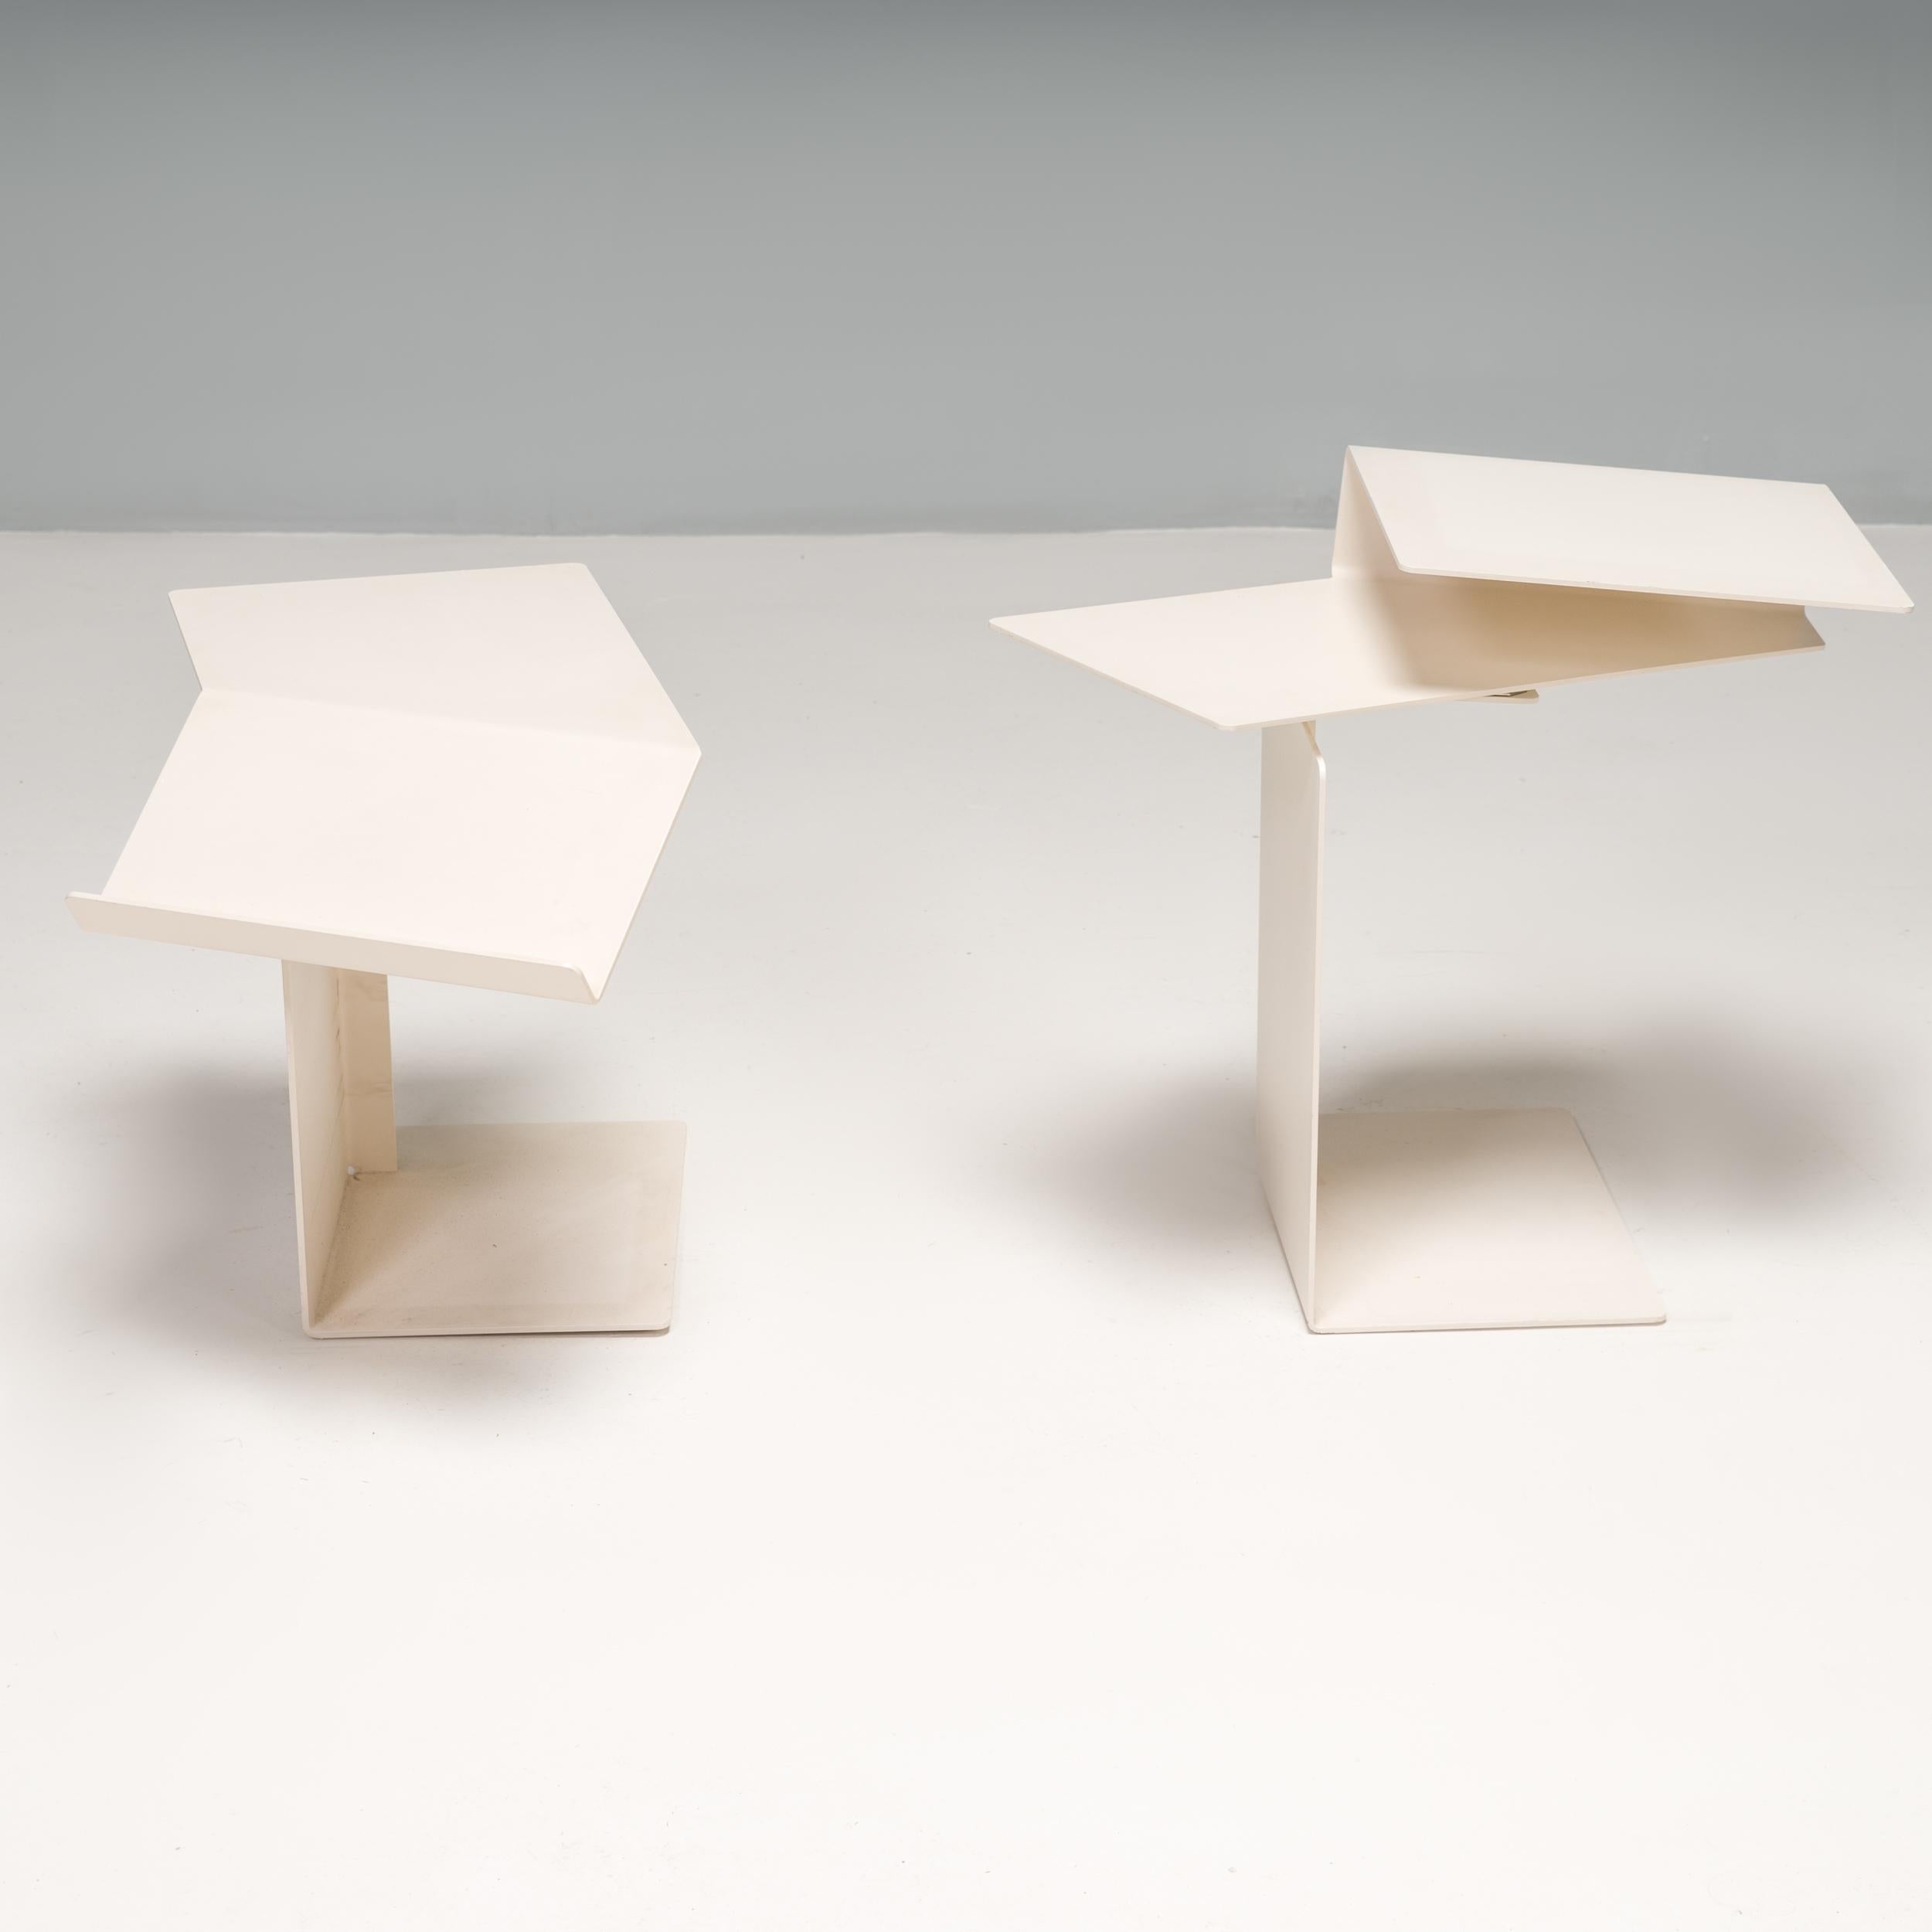 Originally designed by Konstantin Grcic for Classicon in 2002, the Diana side table collection features a multitude of variations on the origami-style design, each named after a letter in the alphabet.

Experimenting with how many planes could be